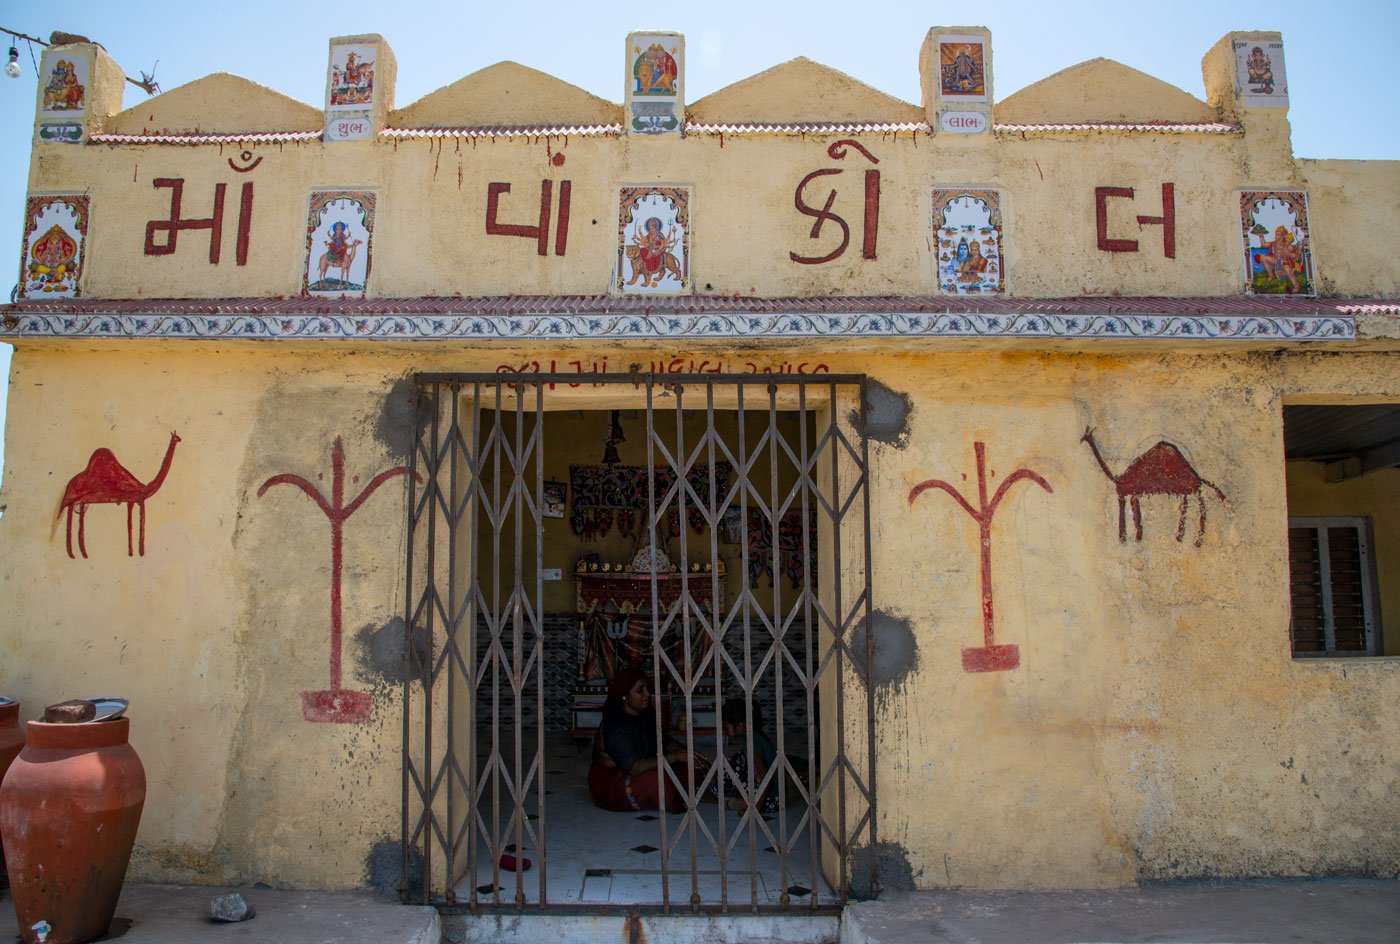 A temple in Beh village. The deity is worshipped by Bhopa Rabaris, who believe she looks after the camels and their herders